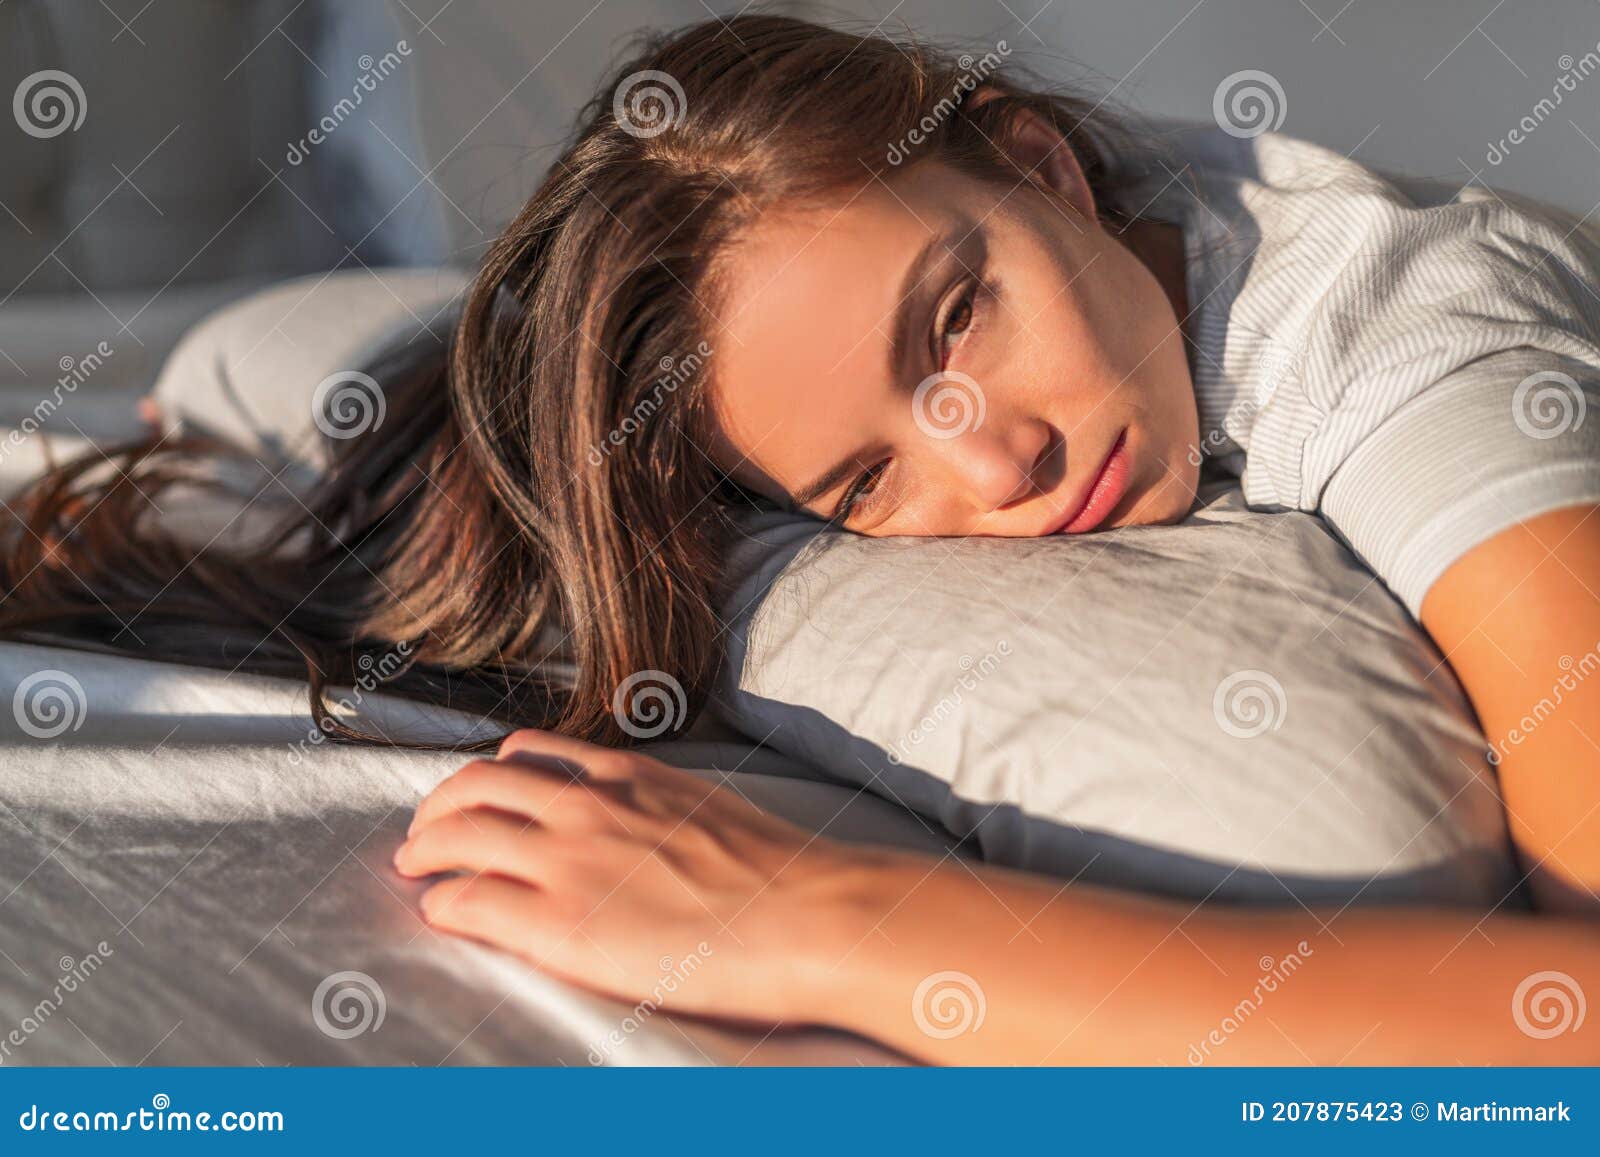 Funny Tired Lazy Asian Young Woman Waking Up in Bed Sleepy Morning Fatigue  with Half Open Eyes Can& X27;t Wake Up Lying on Stock Image - Image of  awake, people: 207875423